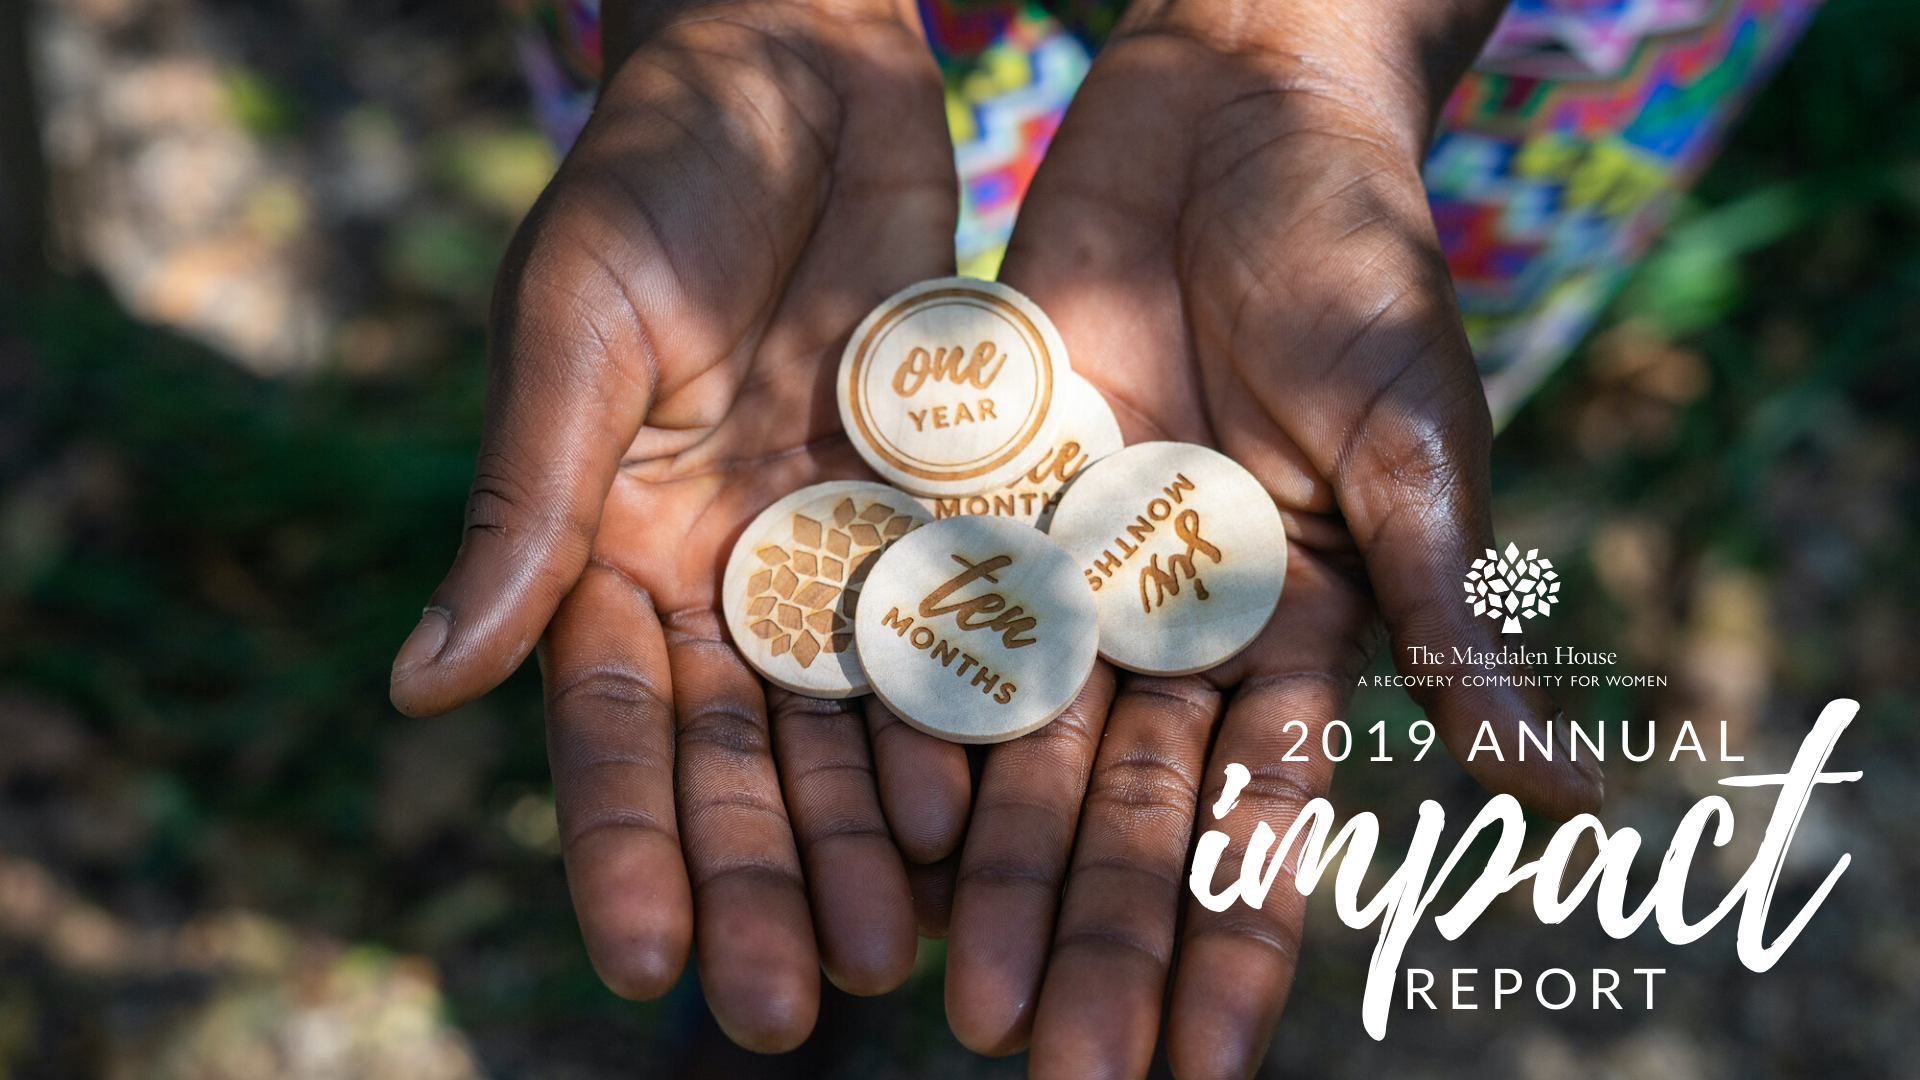 A Year in Review: 2019 Annual Impact Report